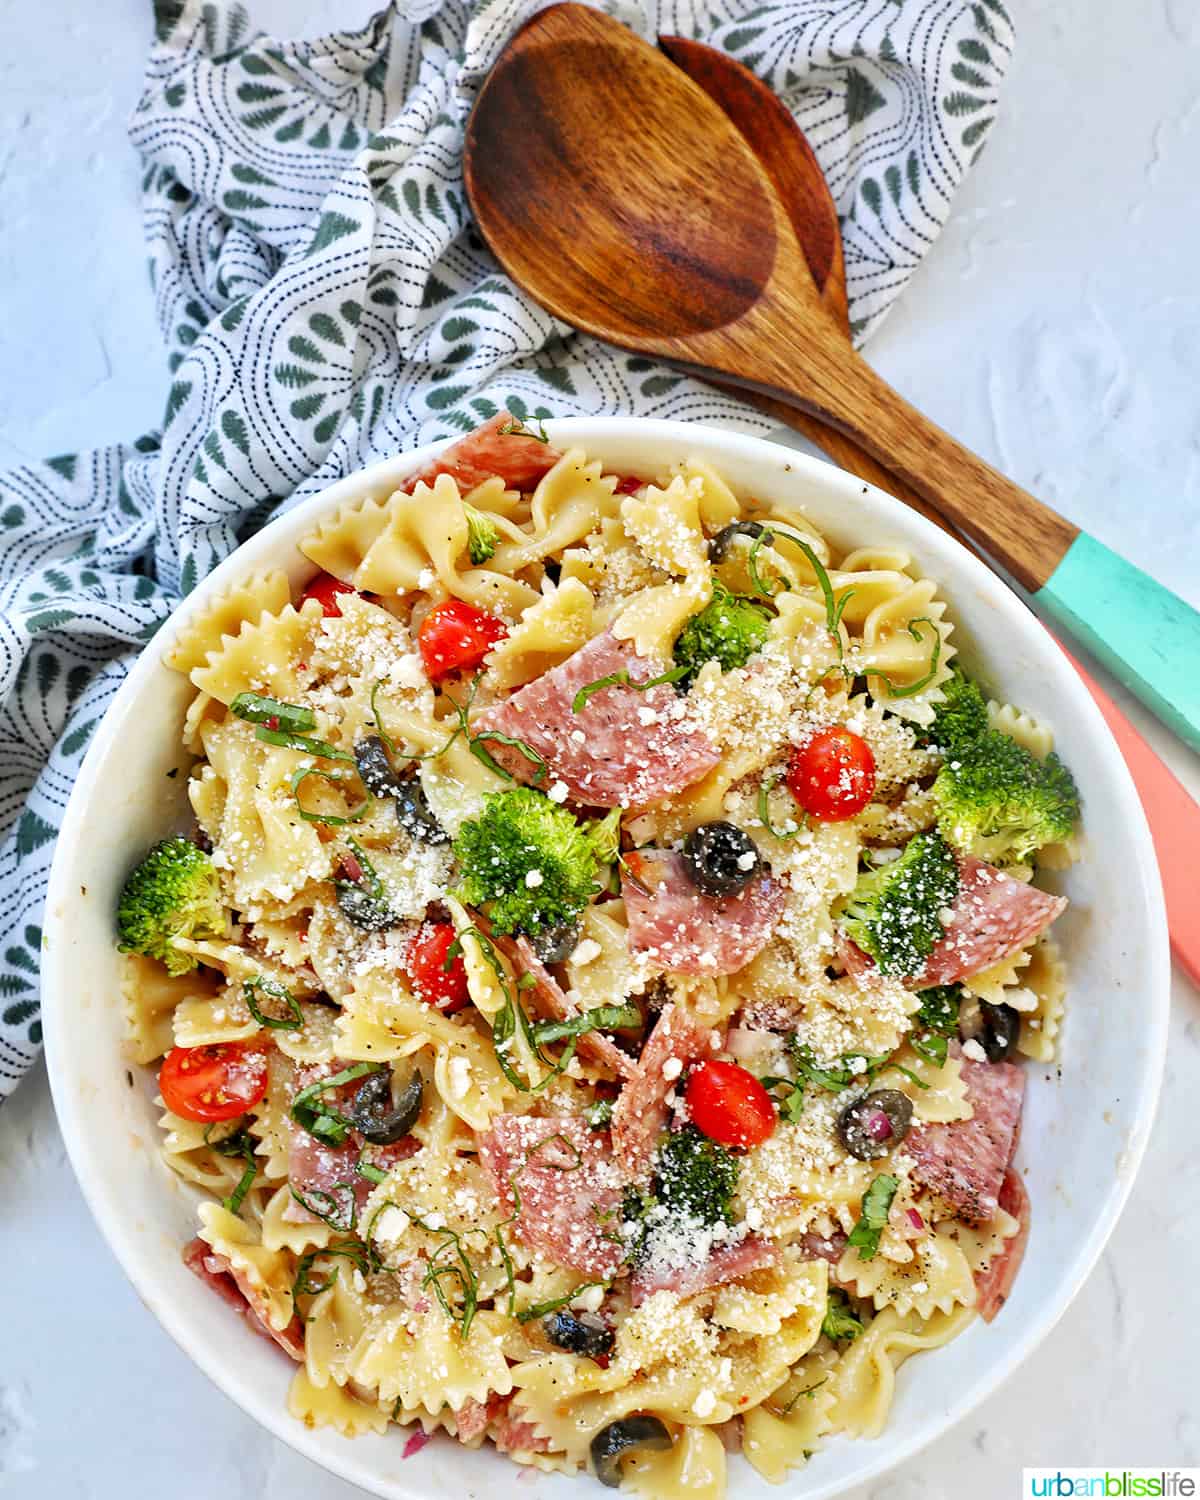 Italian bowtie pasta salad with salami, olives, tomatoes, broccoli, and parmesan cheese in a white bowl.